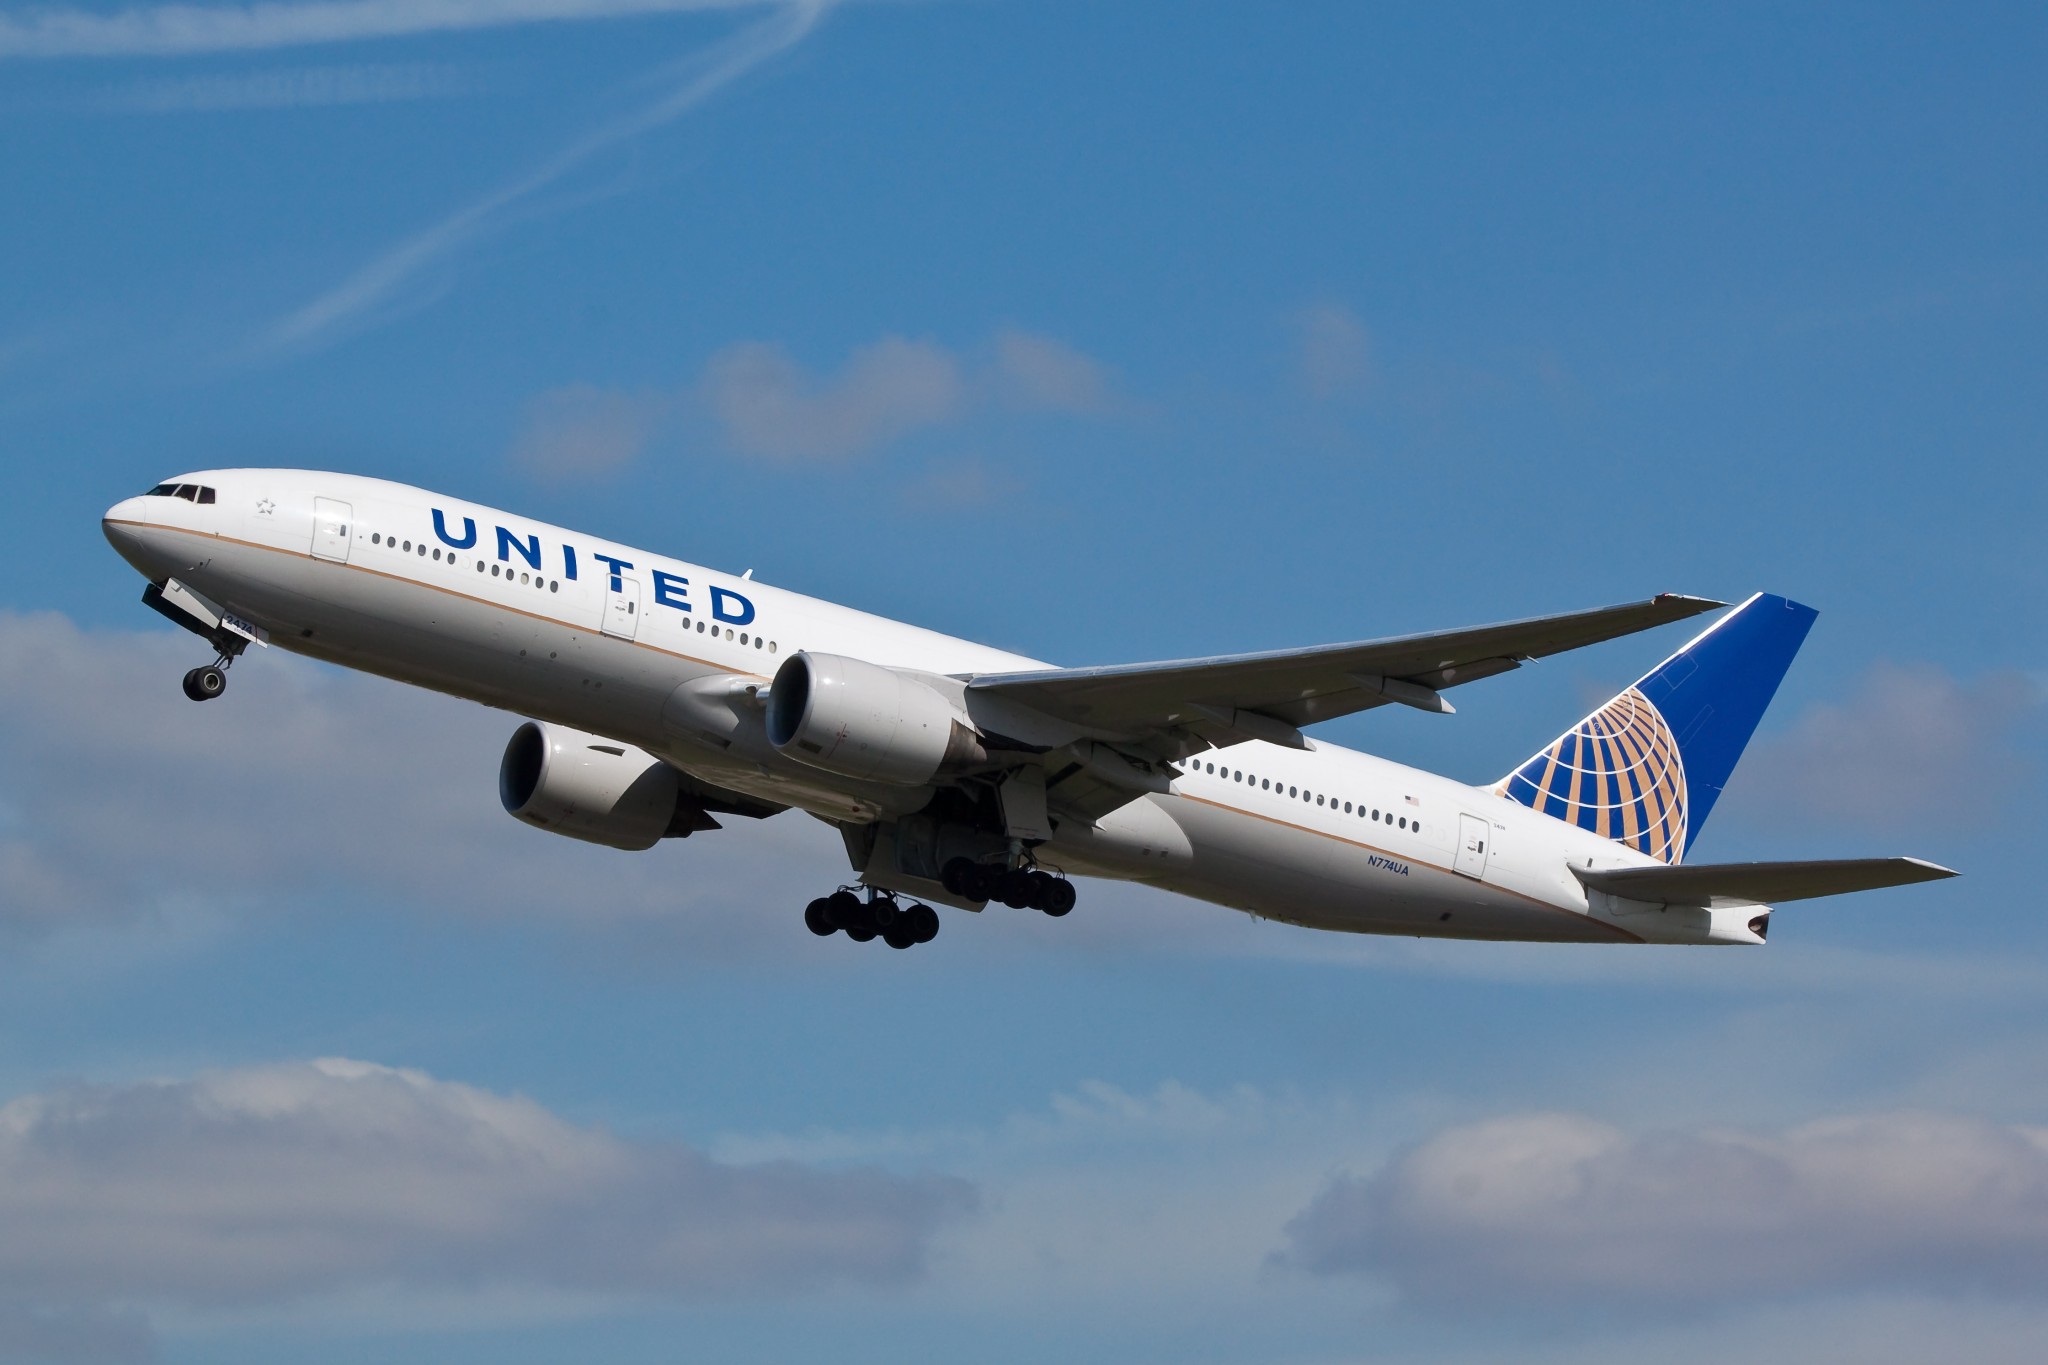 United Airlines prepares its second EETC of 2016